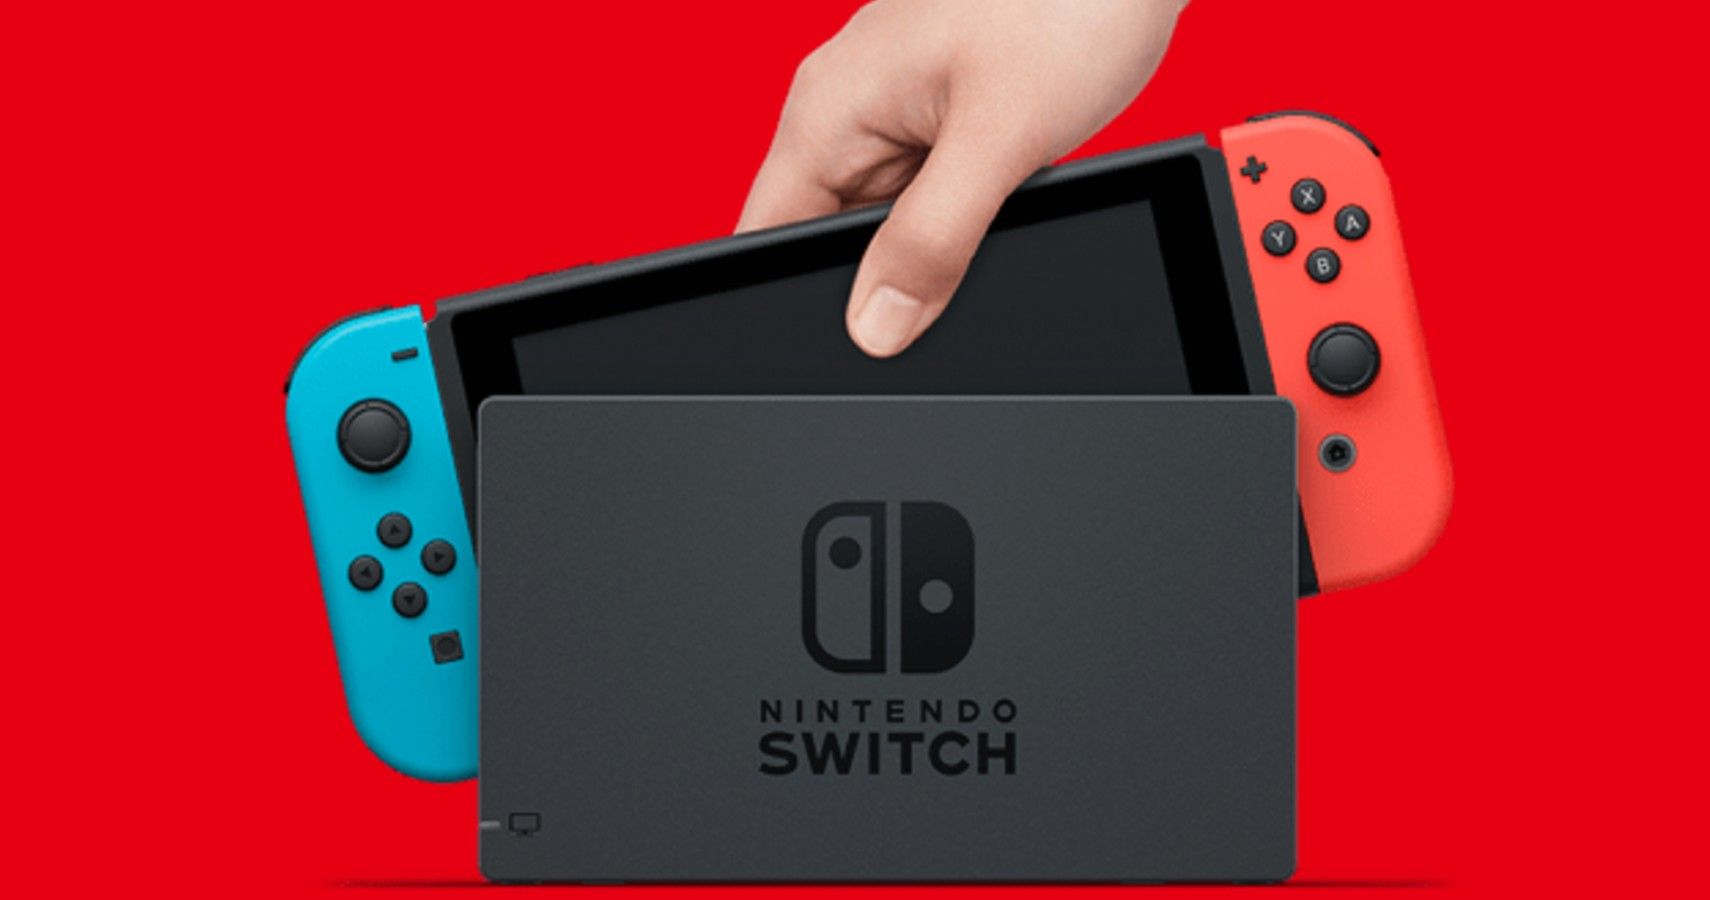 New Nintendo Switch Pro Rumor Refutes Claim Console Will Support 4K